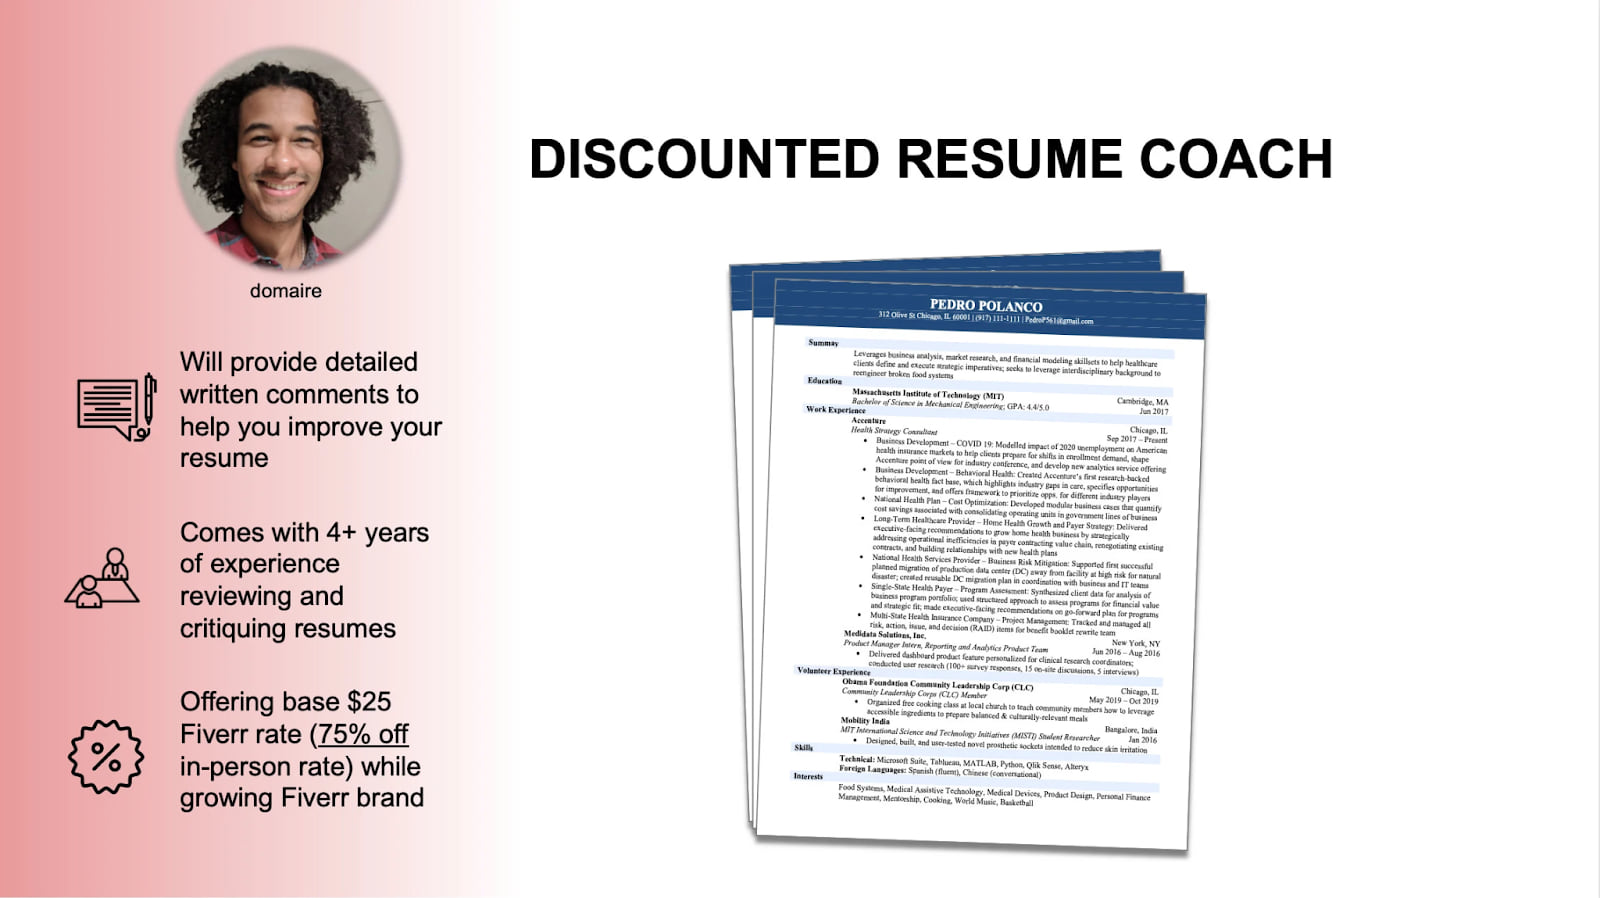 How To Use Brand Resumes Discount Code 1